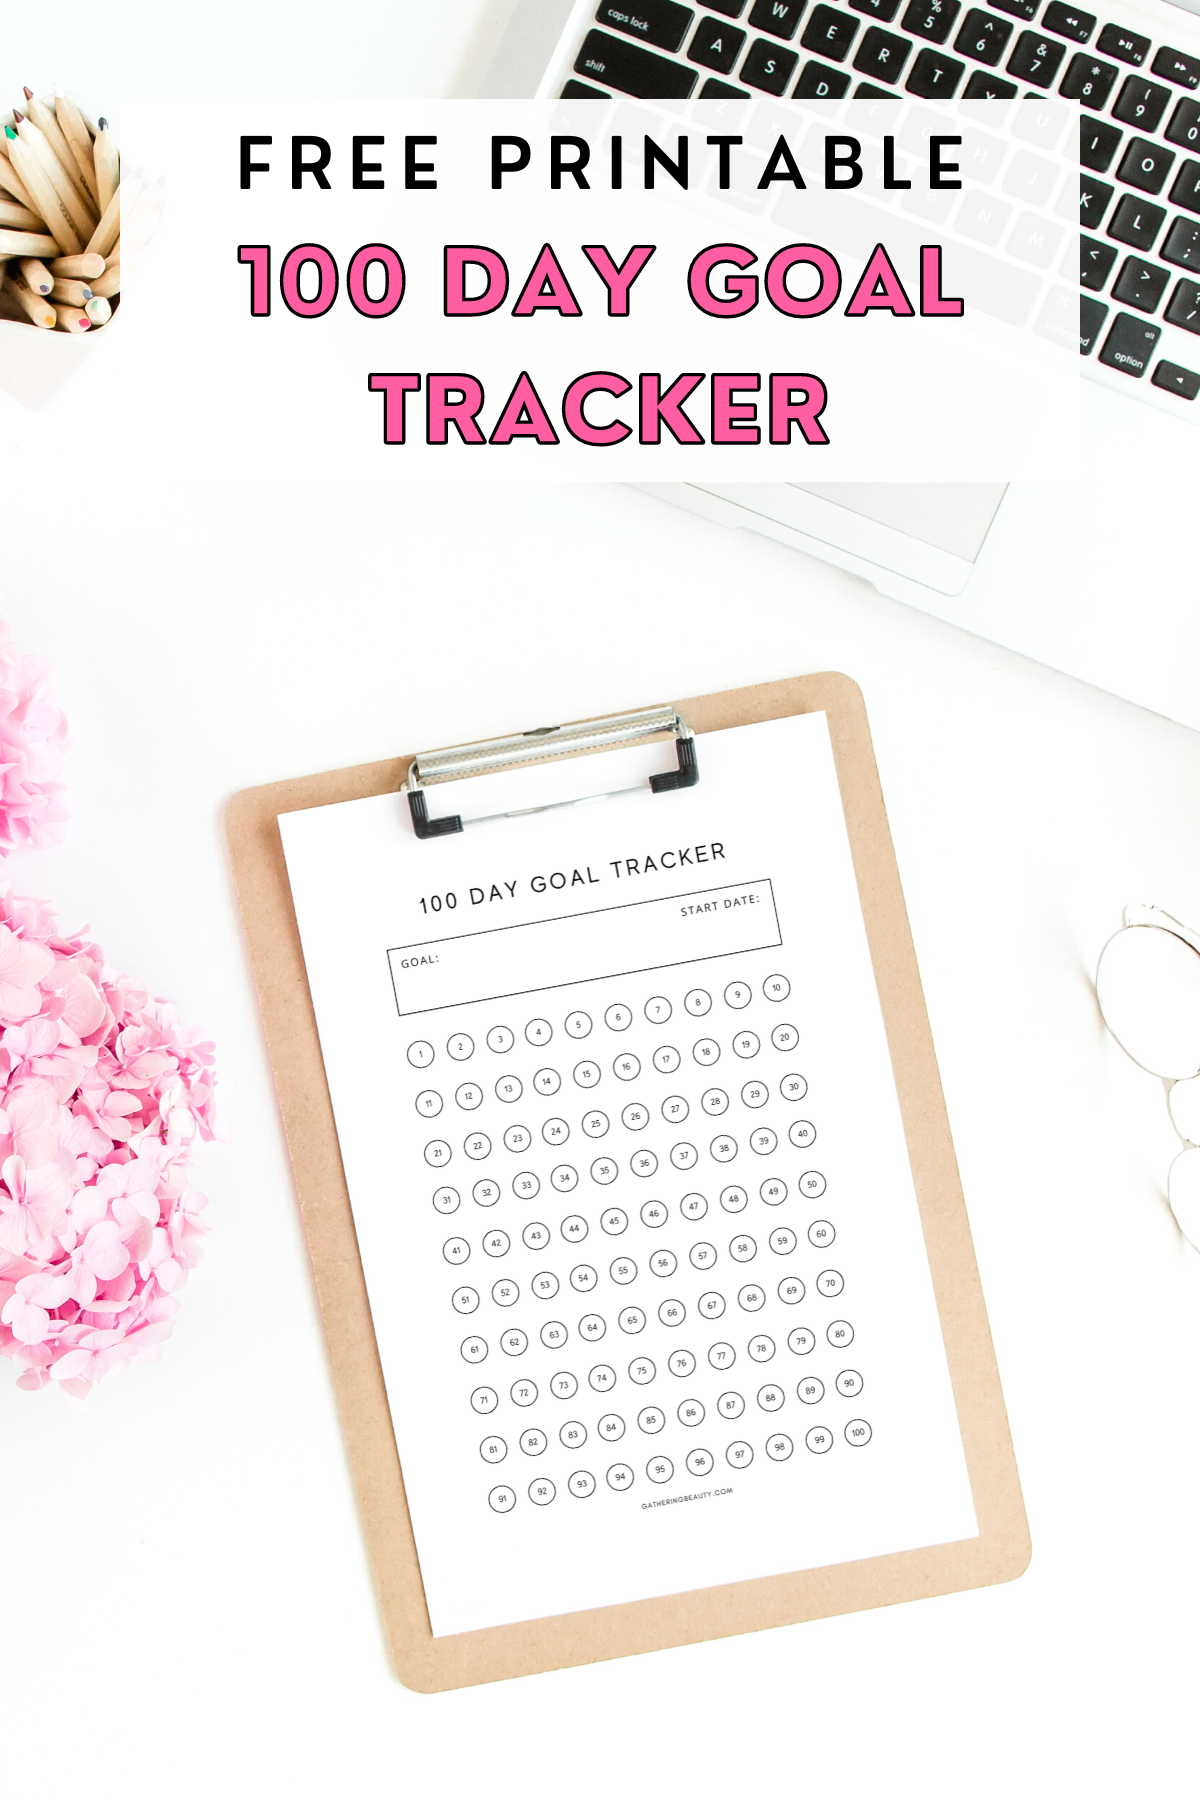 free-printable-100-day-goal-tracker-gathering-beauty